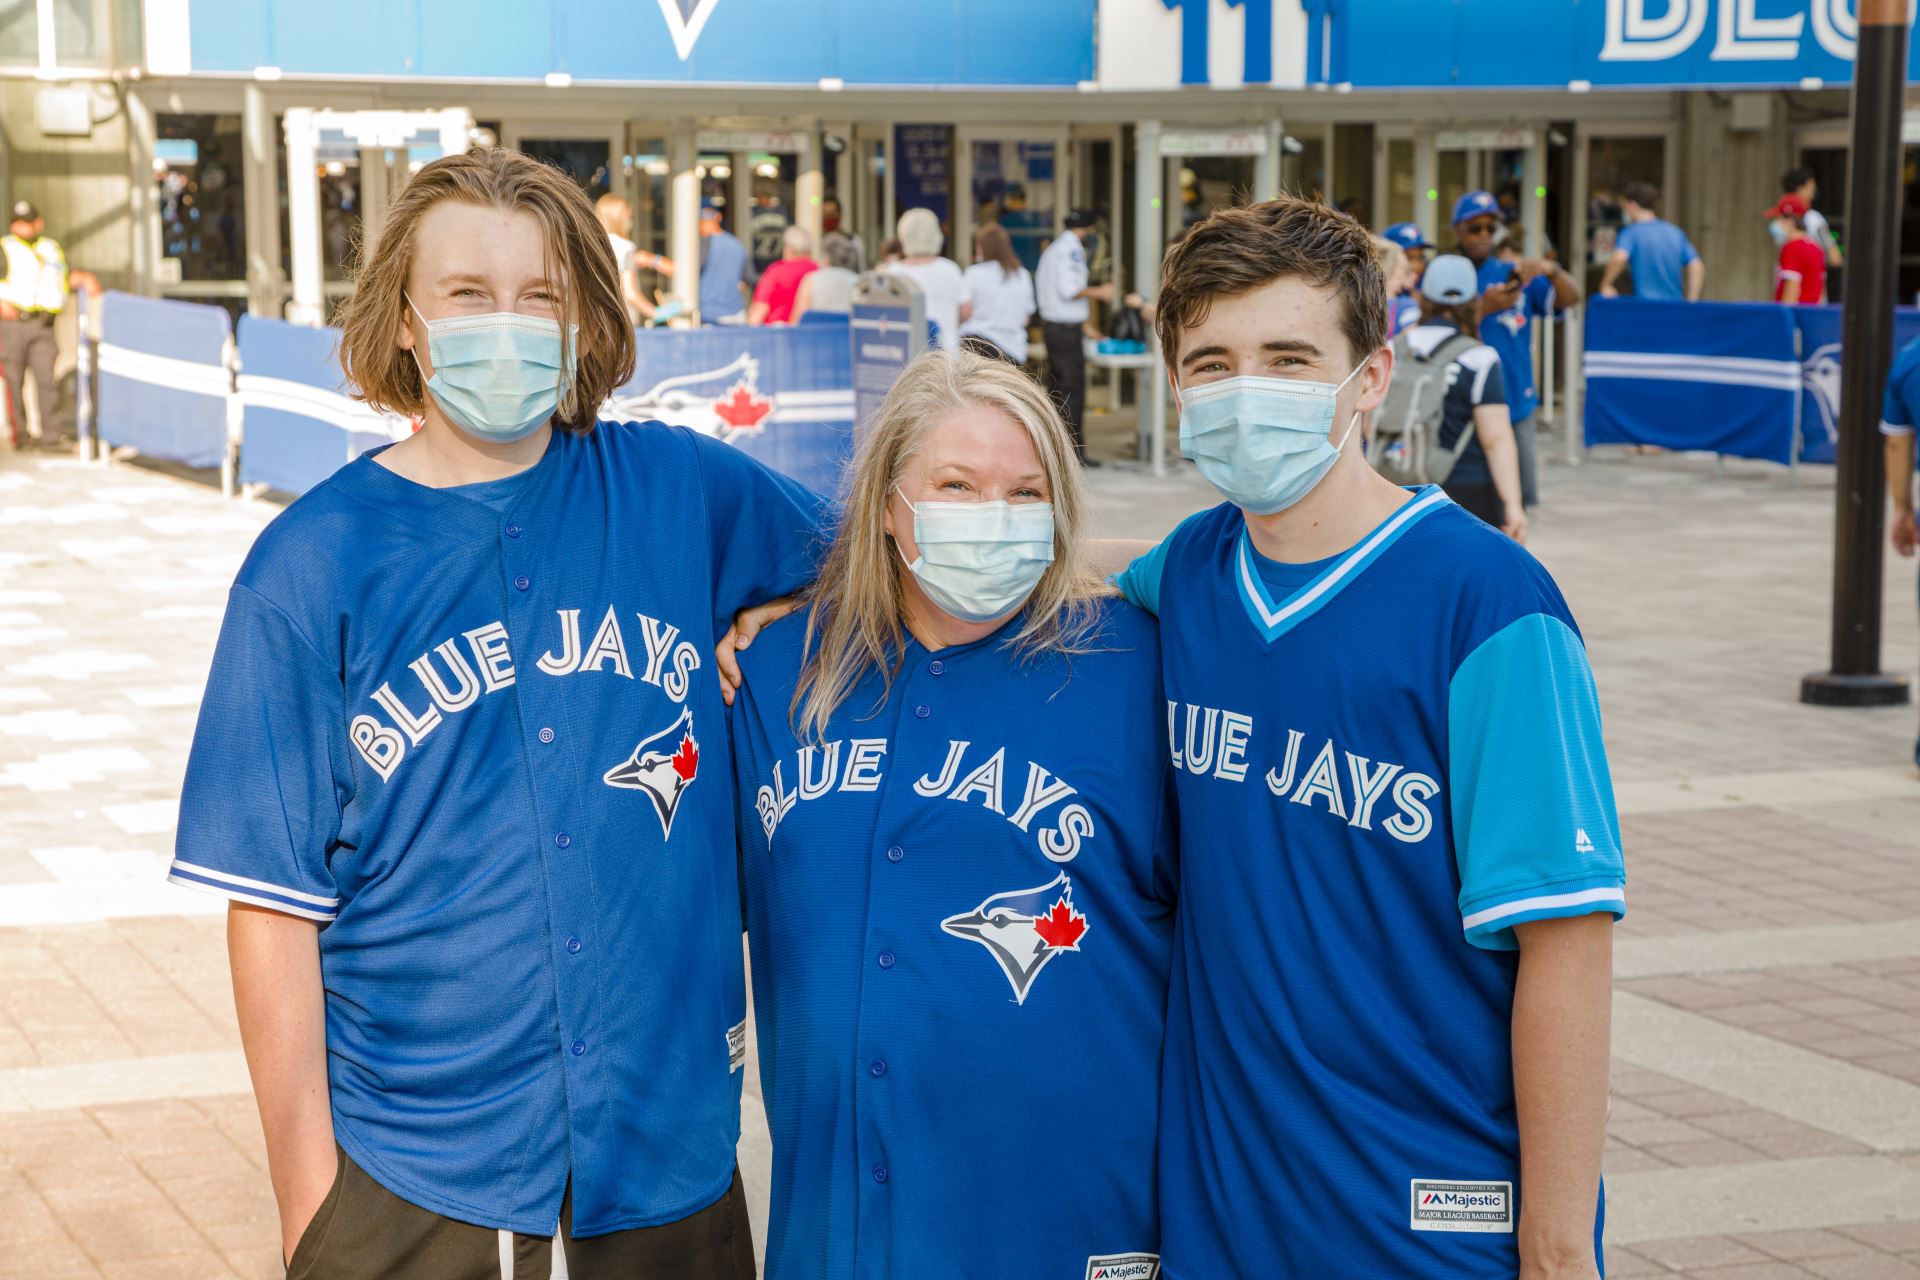 Beth and her nephews at the Jays game